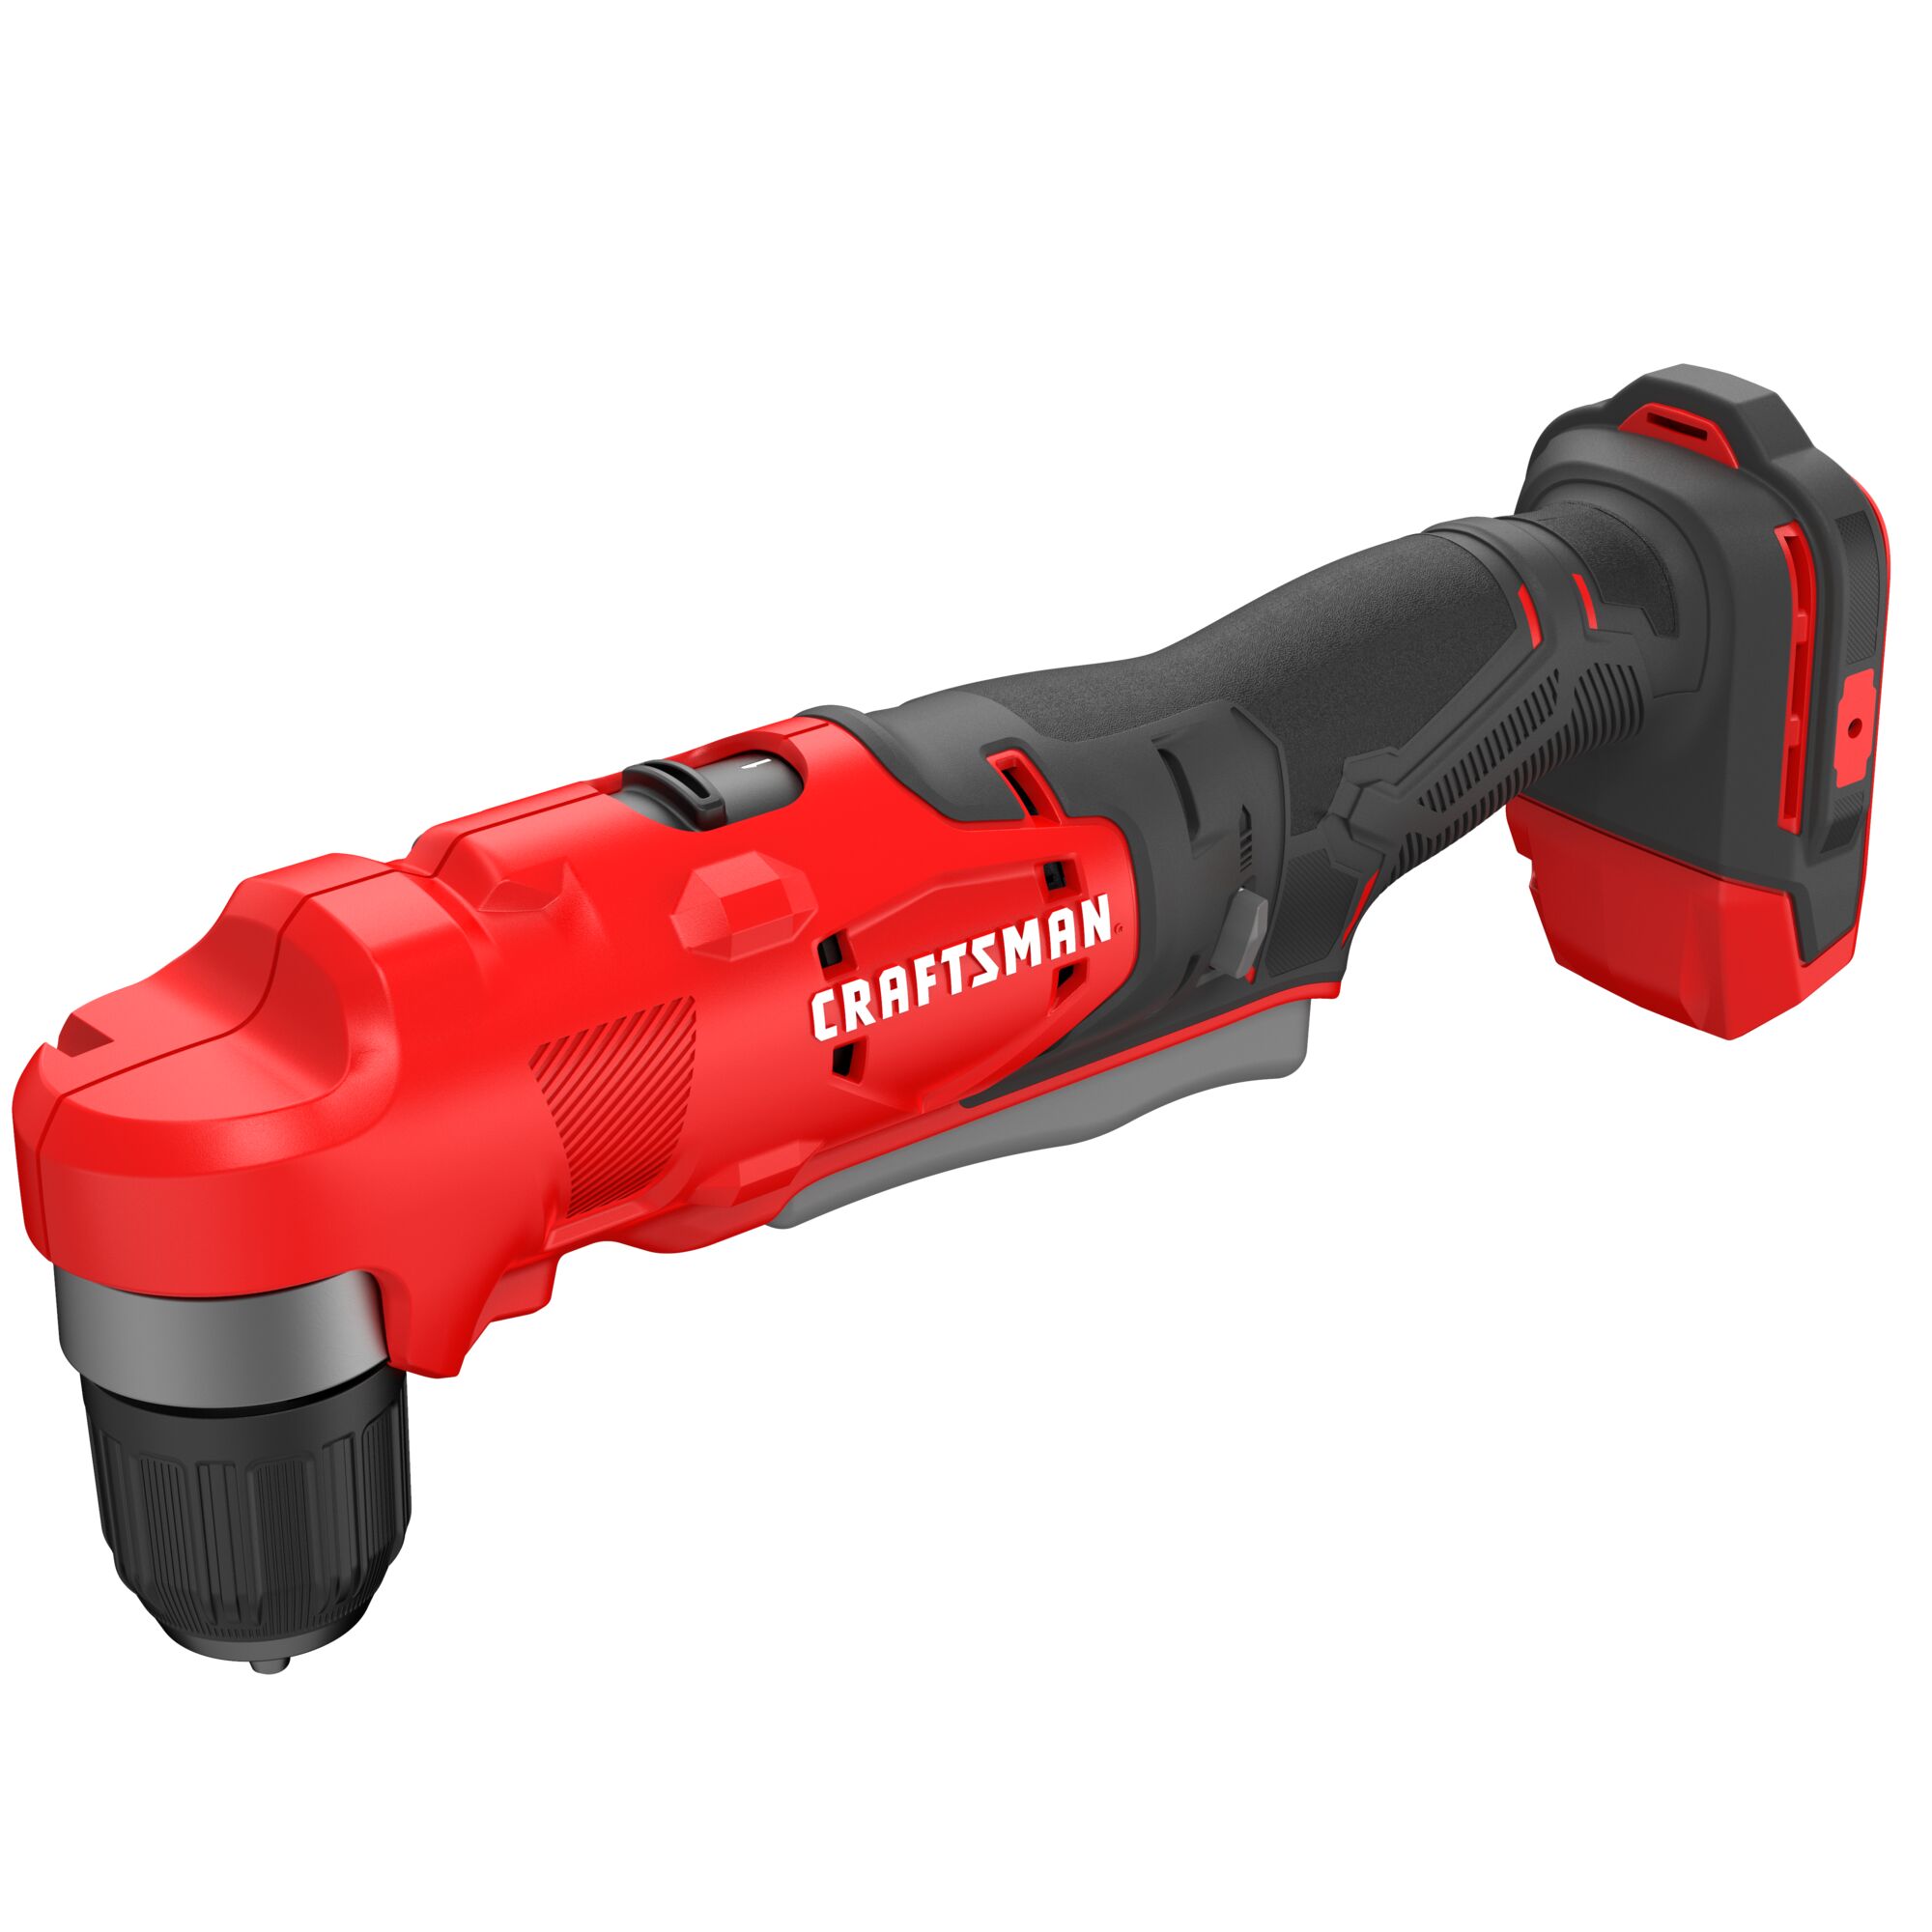 CRAFTSMAN V20 Right Angle Drill on white background